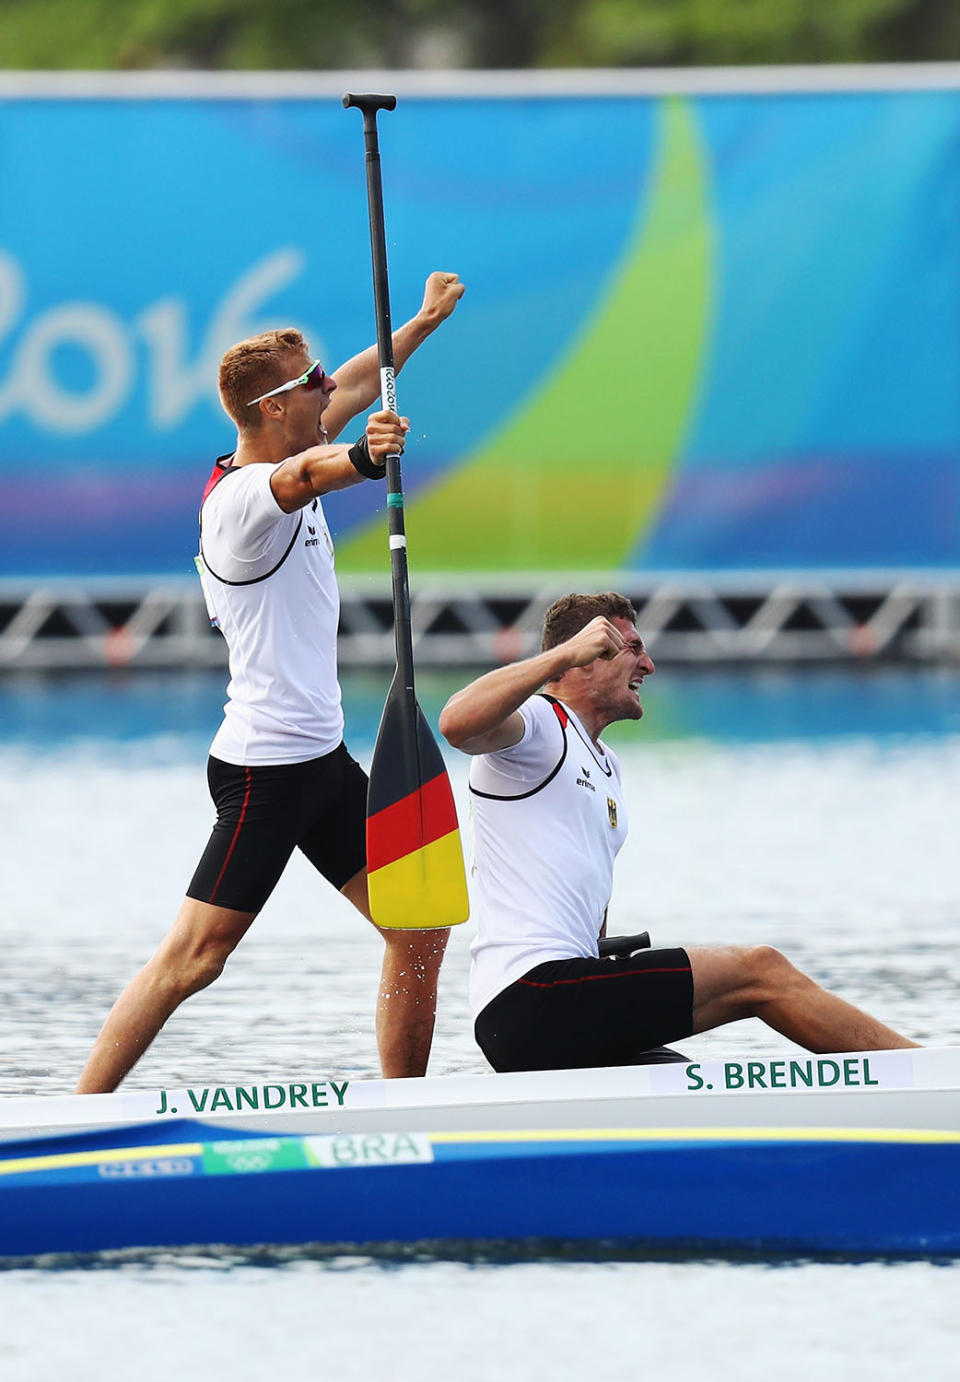 <p>Sebastian Brendel of Germany and Jan Vandrey of Germany celebrate winning the Men’s Canoe Double 1000m on Day 15 of the Rio 2016 Olympic Games at the Lagoa Stadium on August 20, 2016 in Rio de Janeiro, Brazil. (Photo by Ryan Pierse/Getty Images) </p>